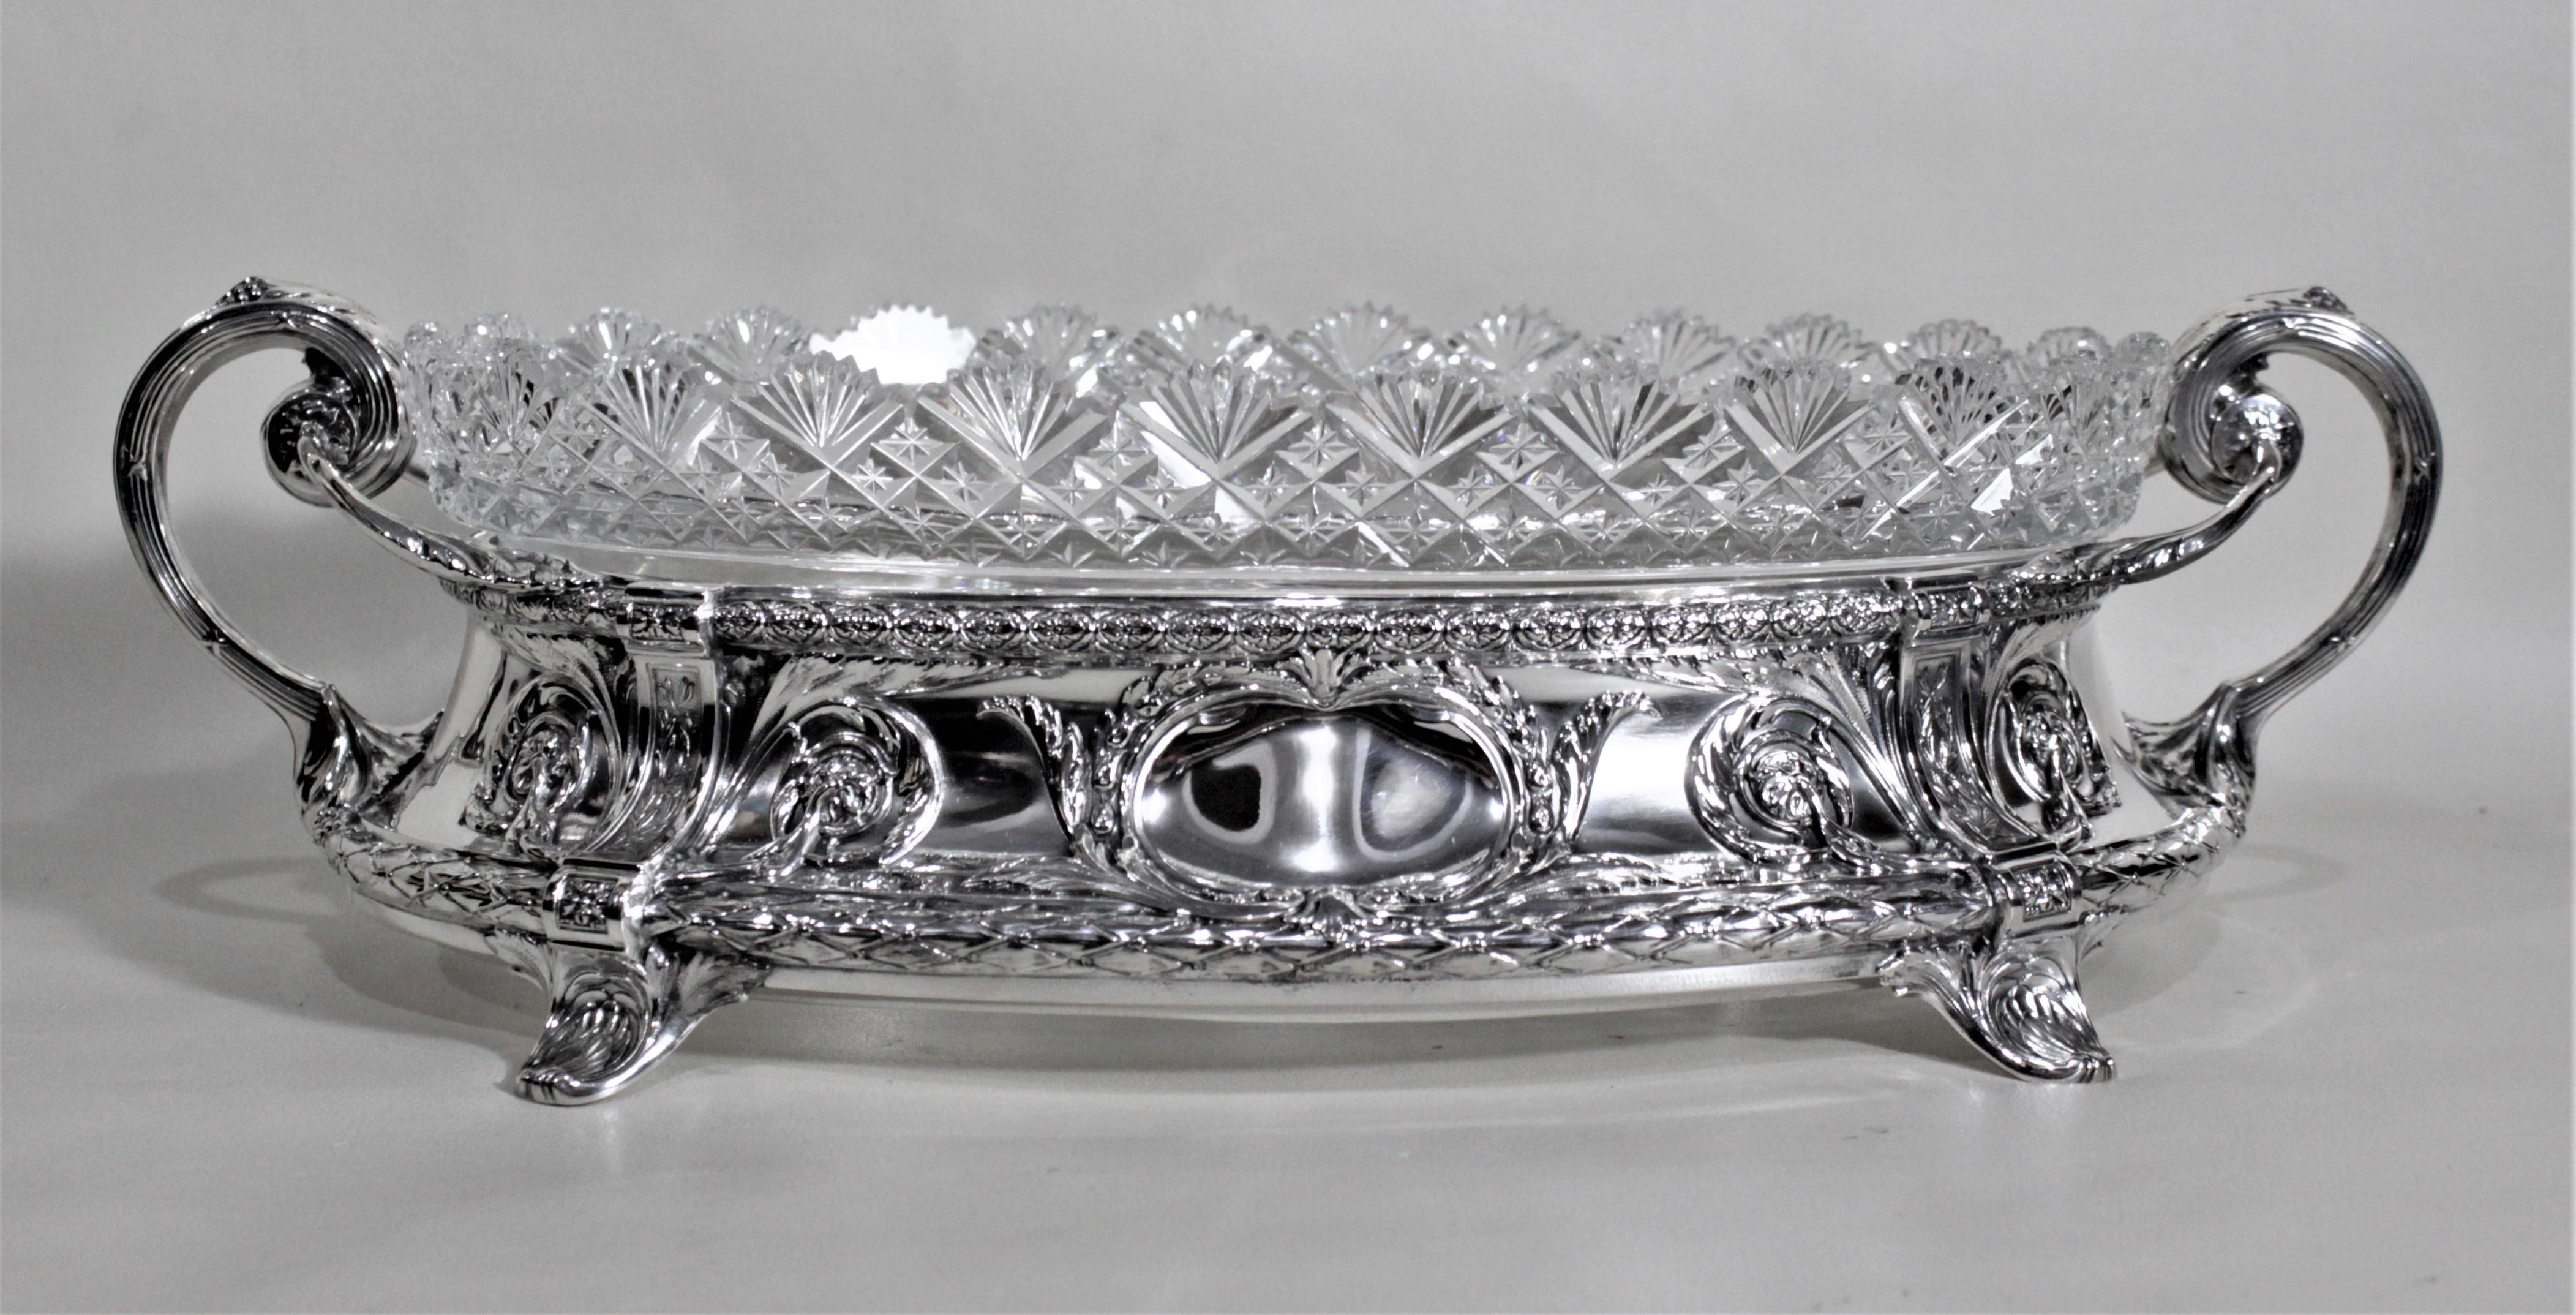 Edwardian Antique German Continental Silver and Cut Crystal Footed Centerpiece